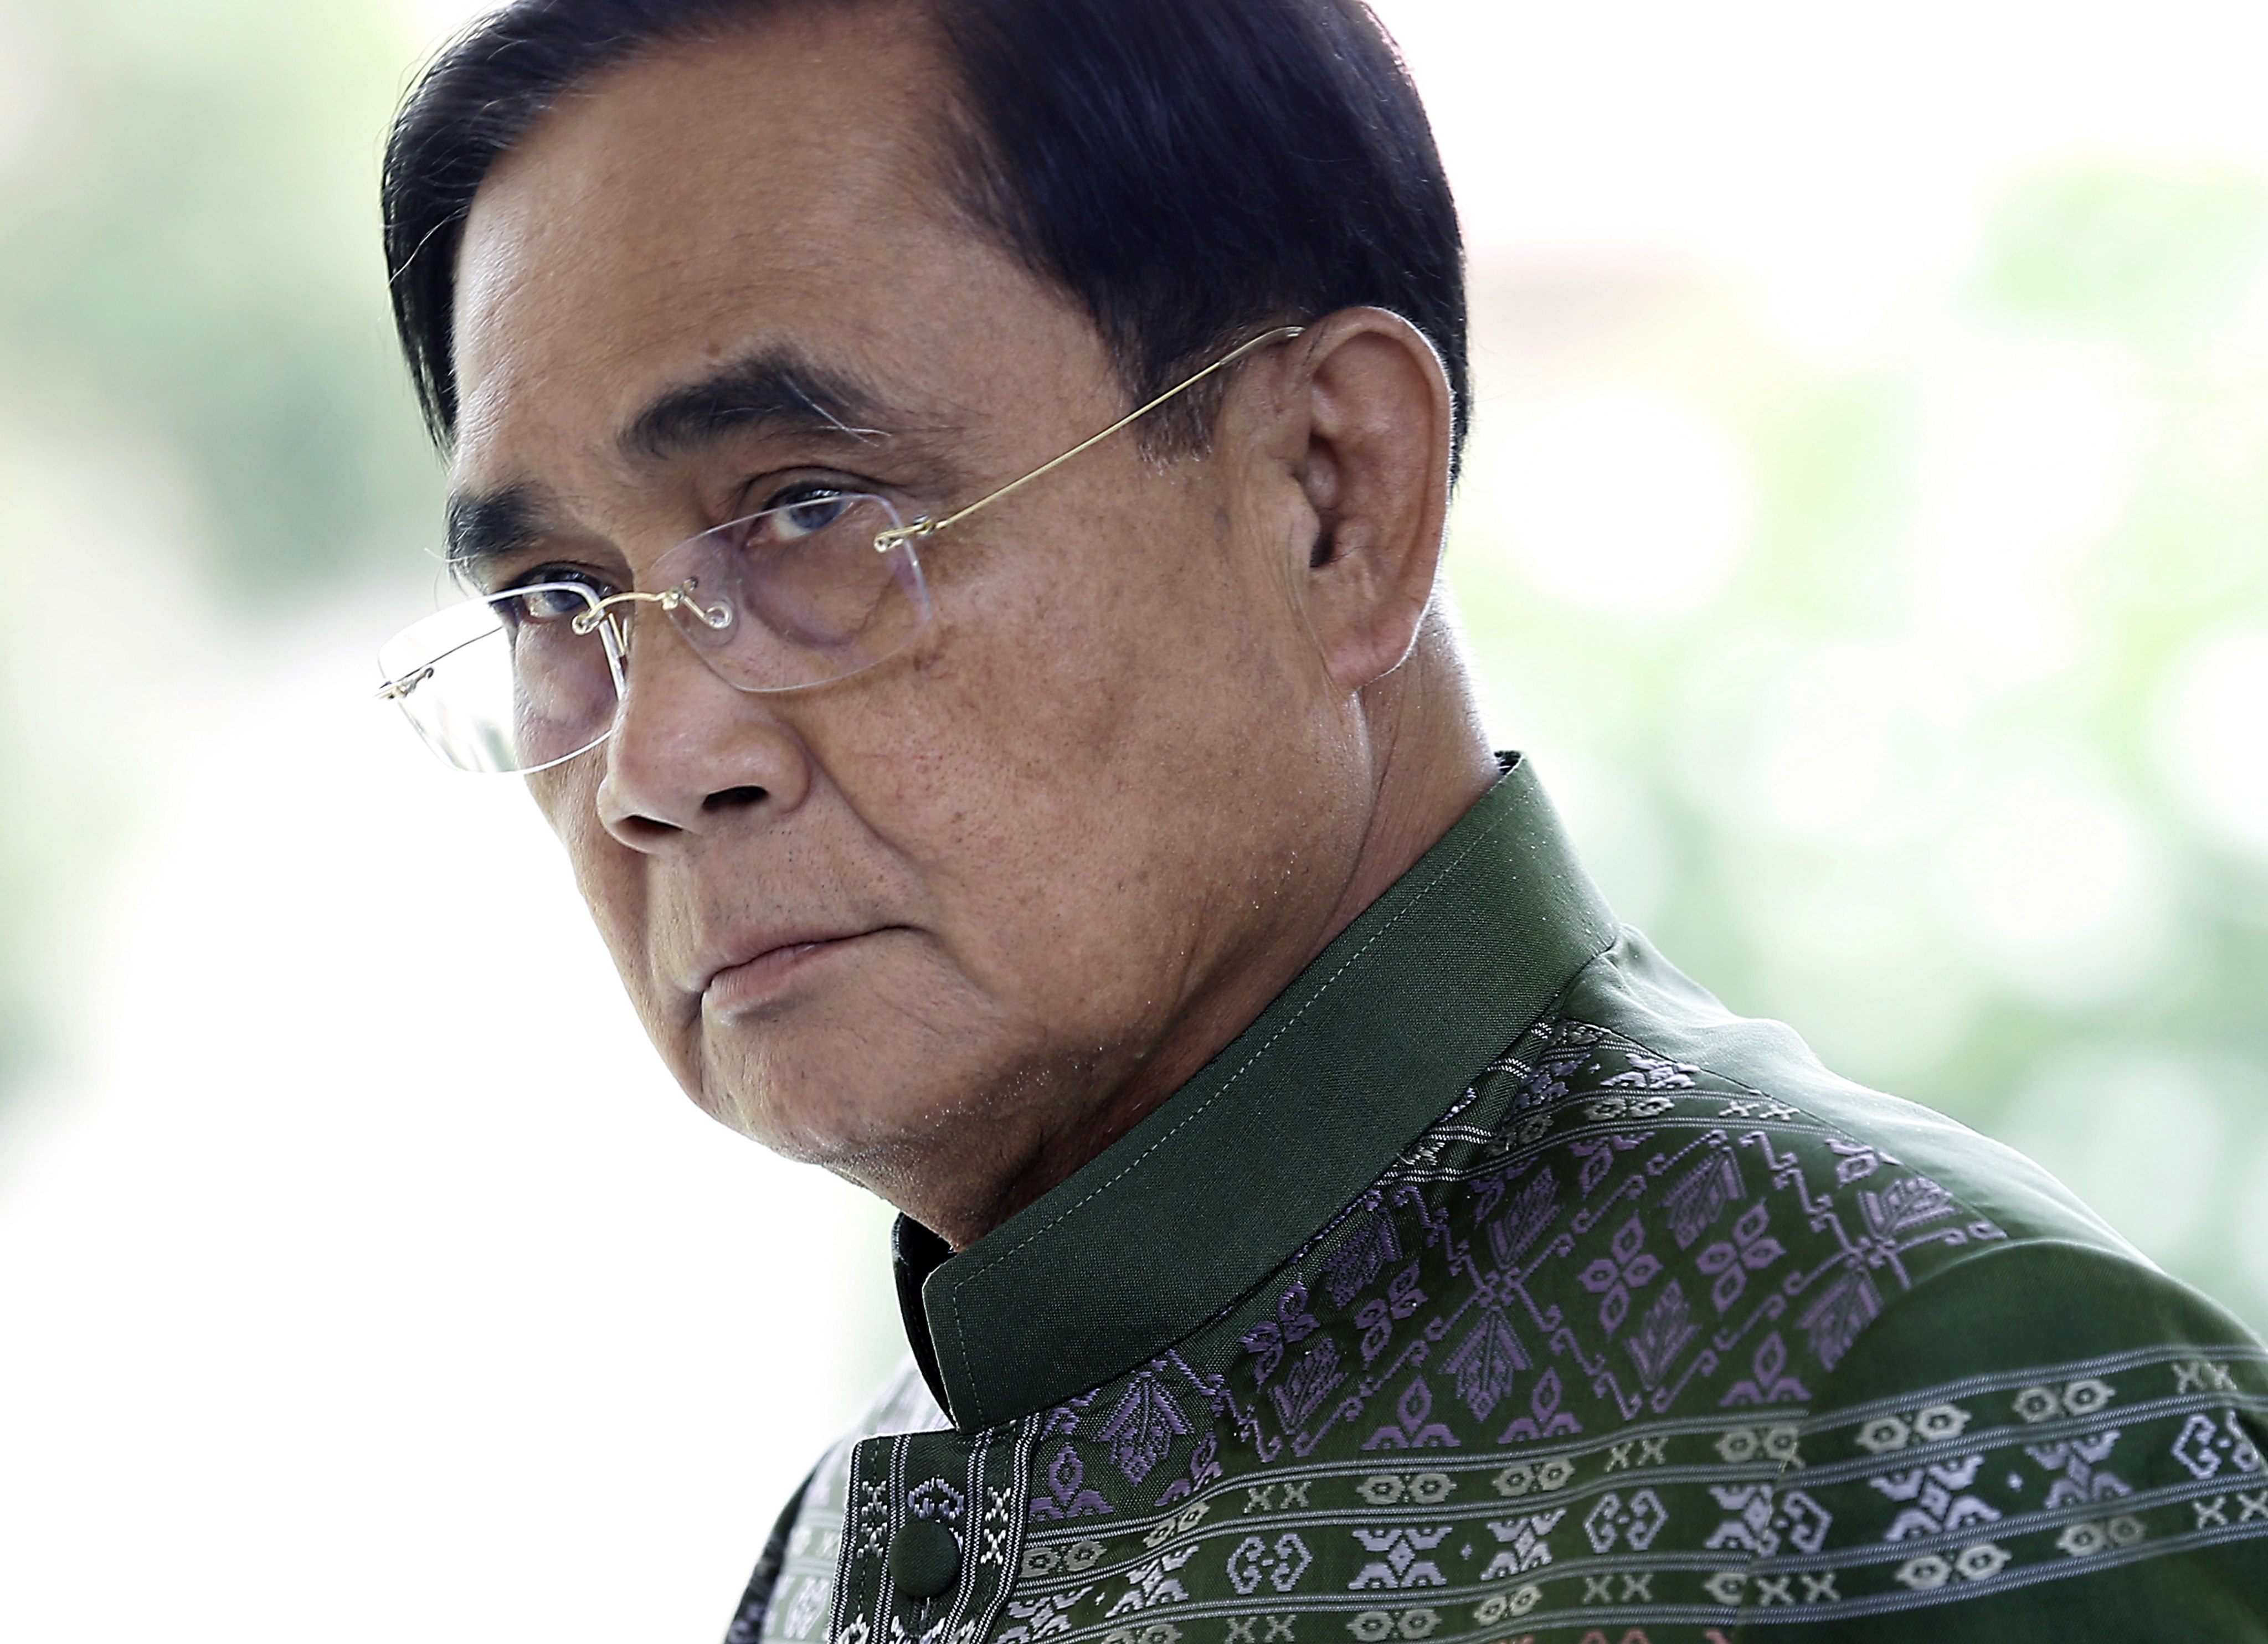 Thailand’s current Prime Minister Prayut Chan-ocha, who seized power in a 2014 coup. In May a general election saw the pro-democracy Move Forward Party win millions of votes. Photo: EPA-EFE